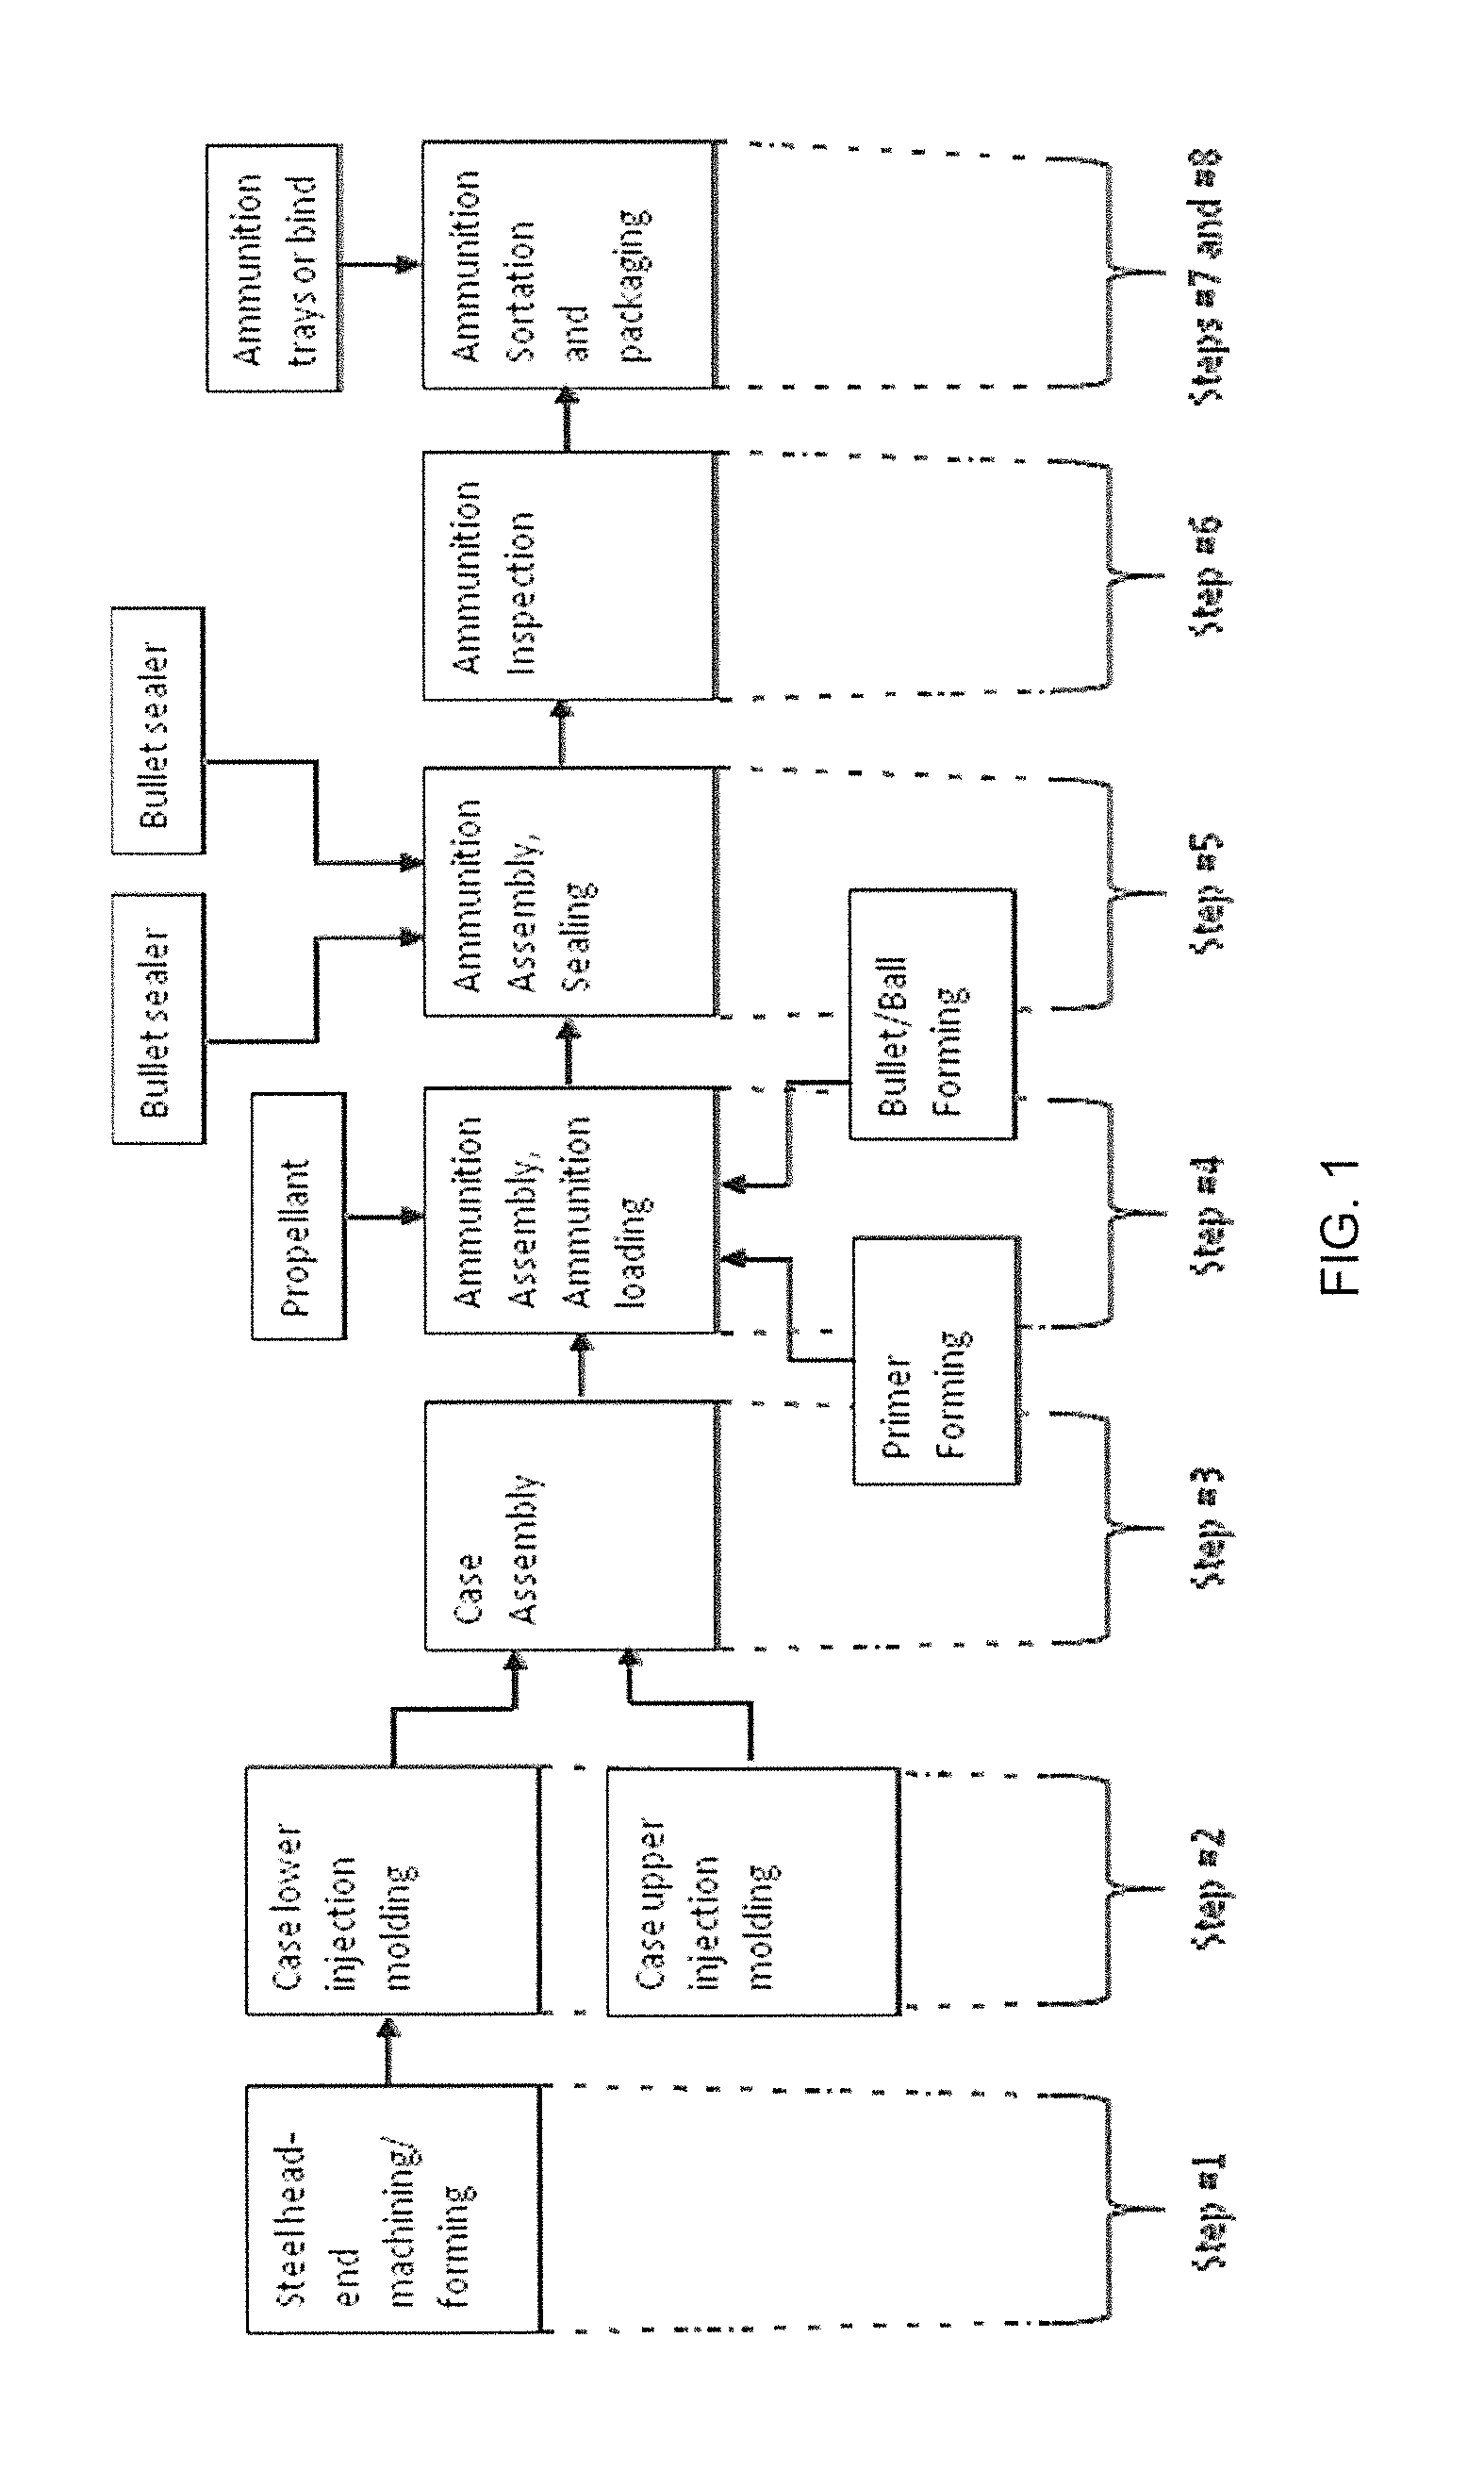 Integrated polymer and metal case ammunition manufacturing system and method